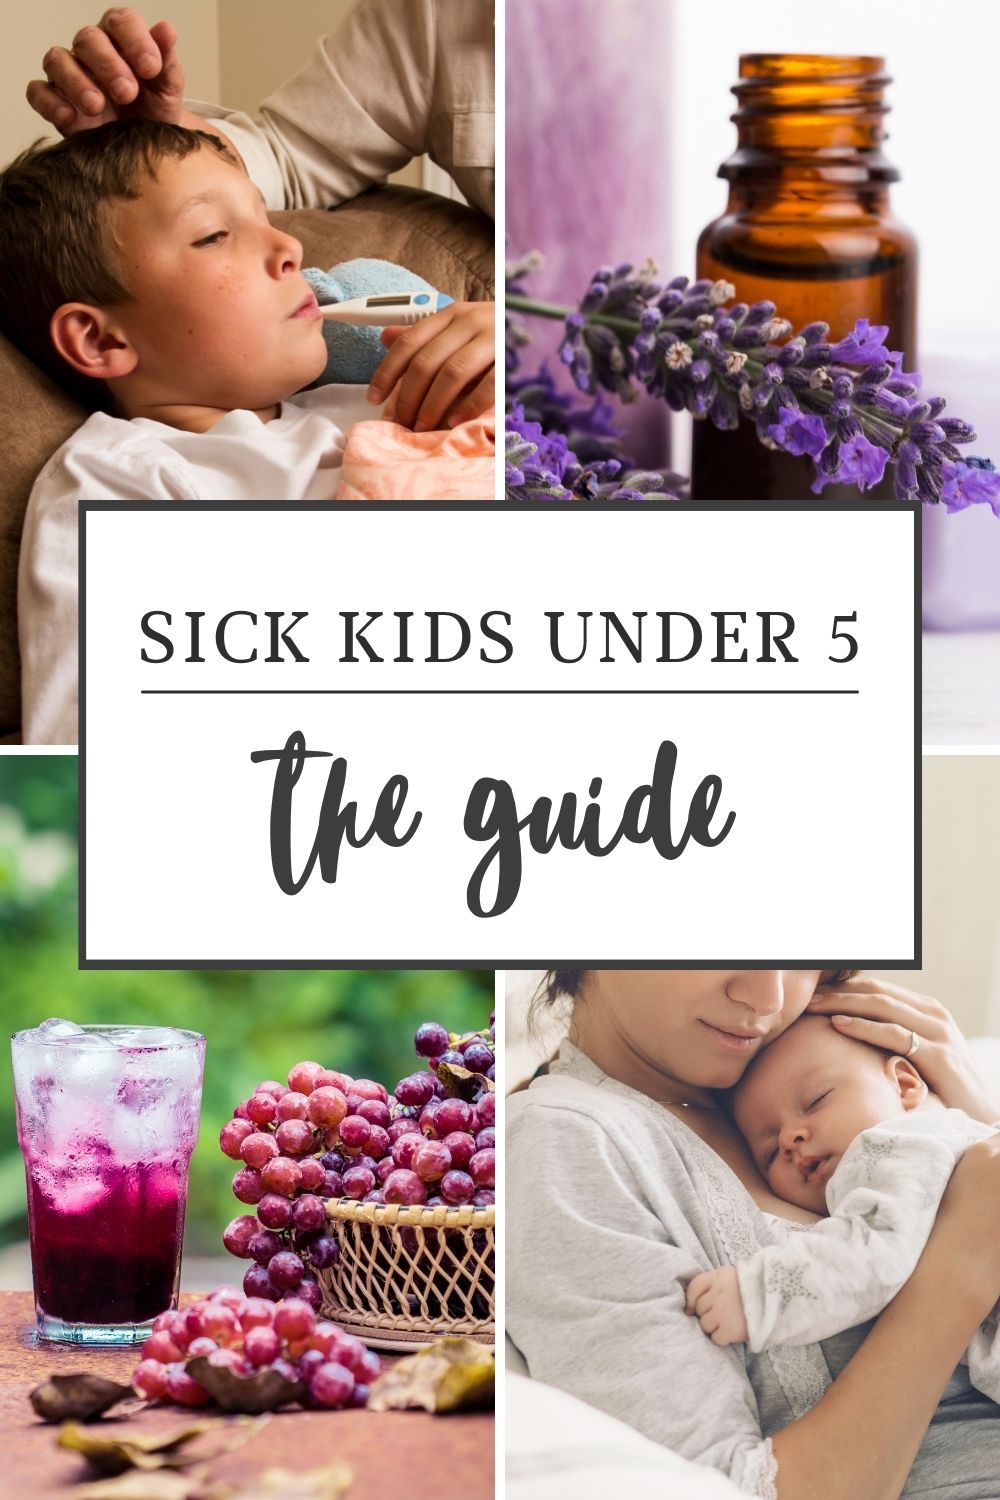 Top 10 Tips to Care for Ailing Children (under 5)